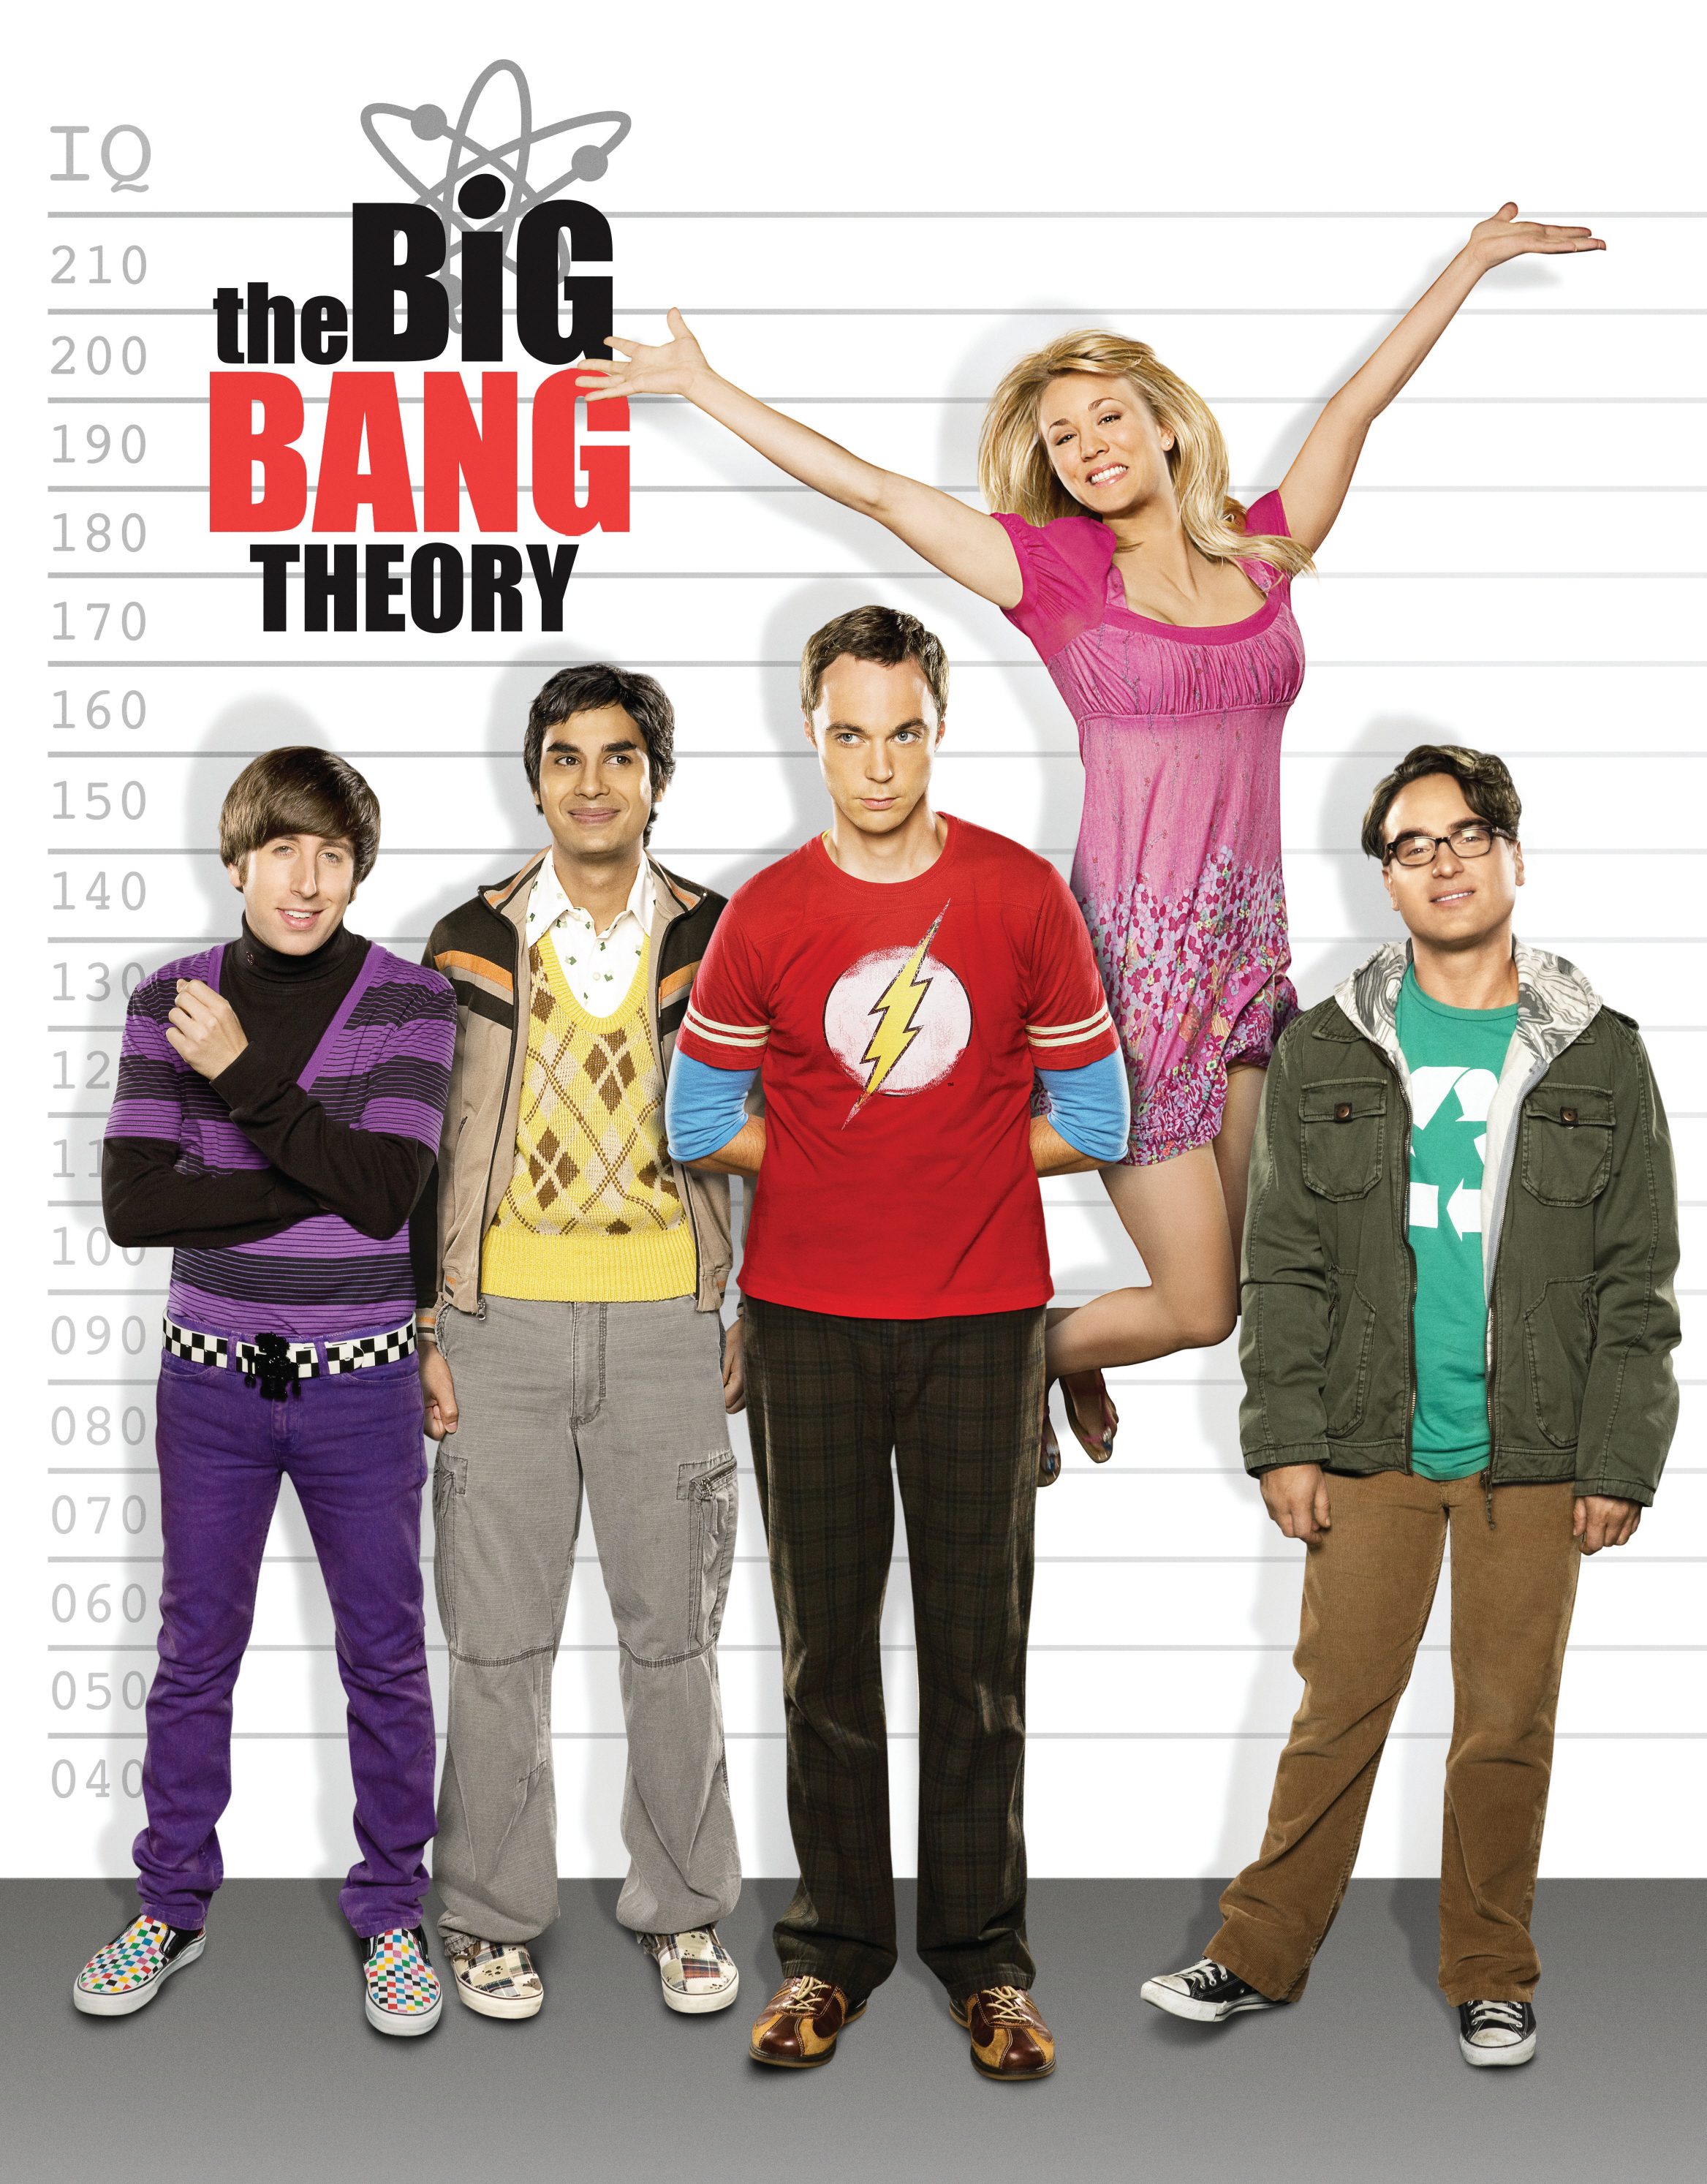 Does life look big theory real the cast like what of bang in The 'Big